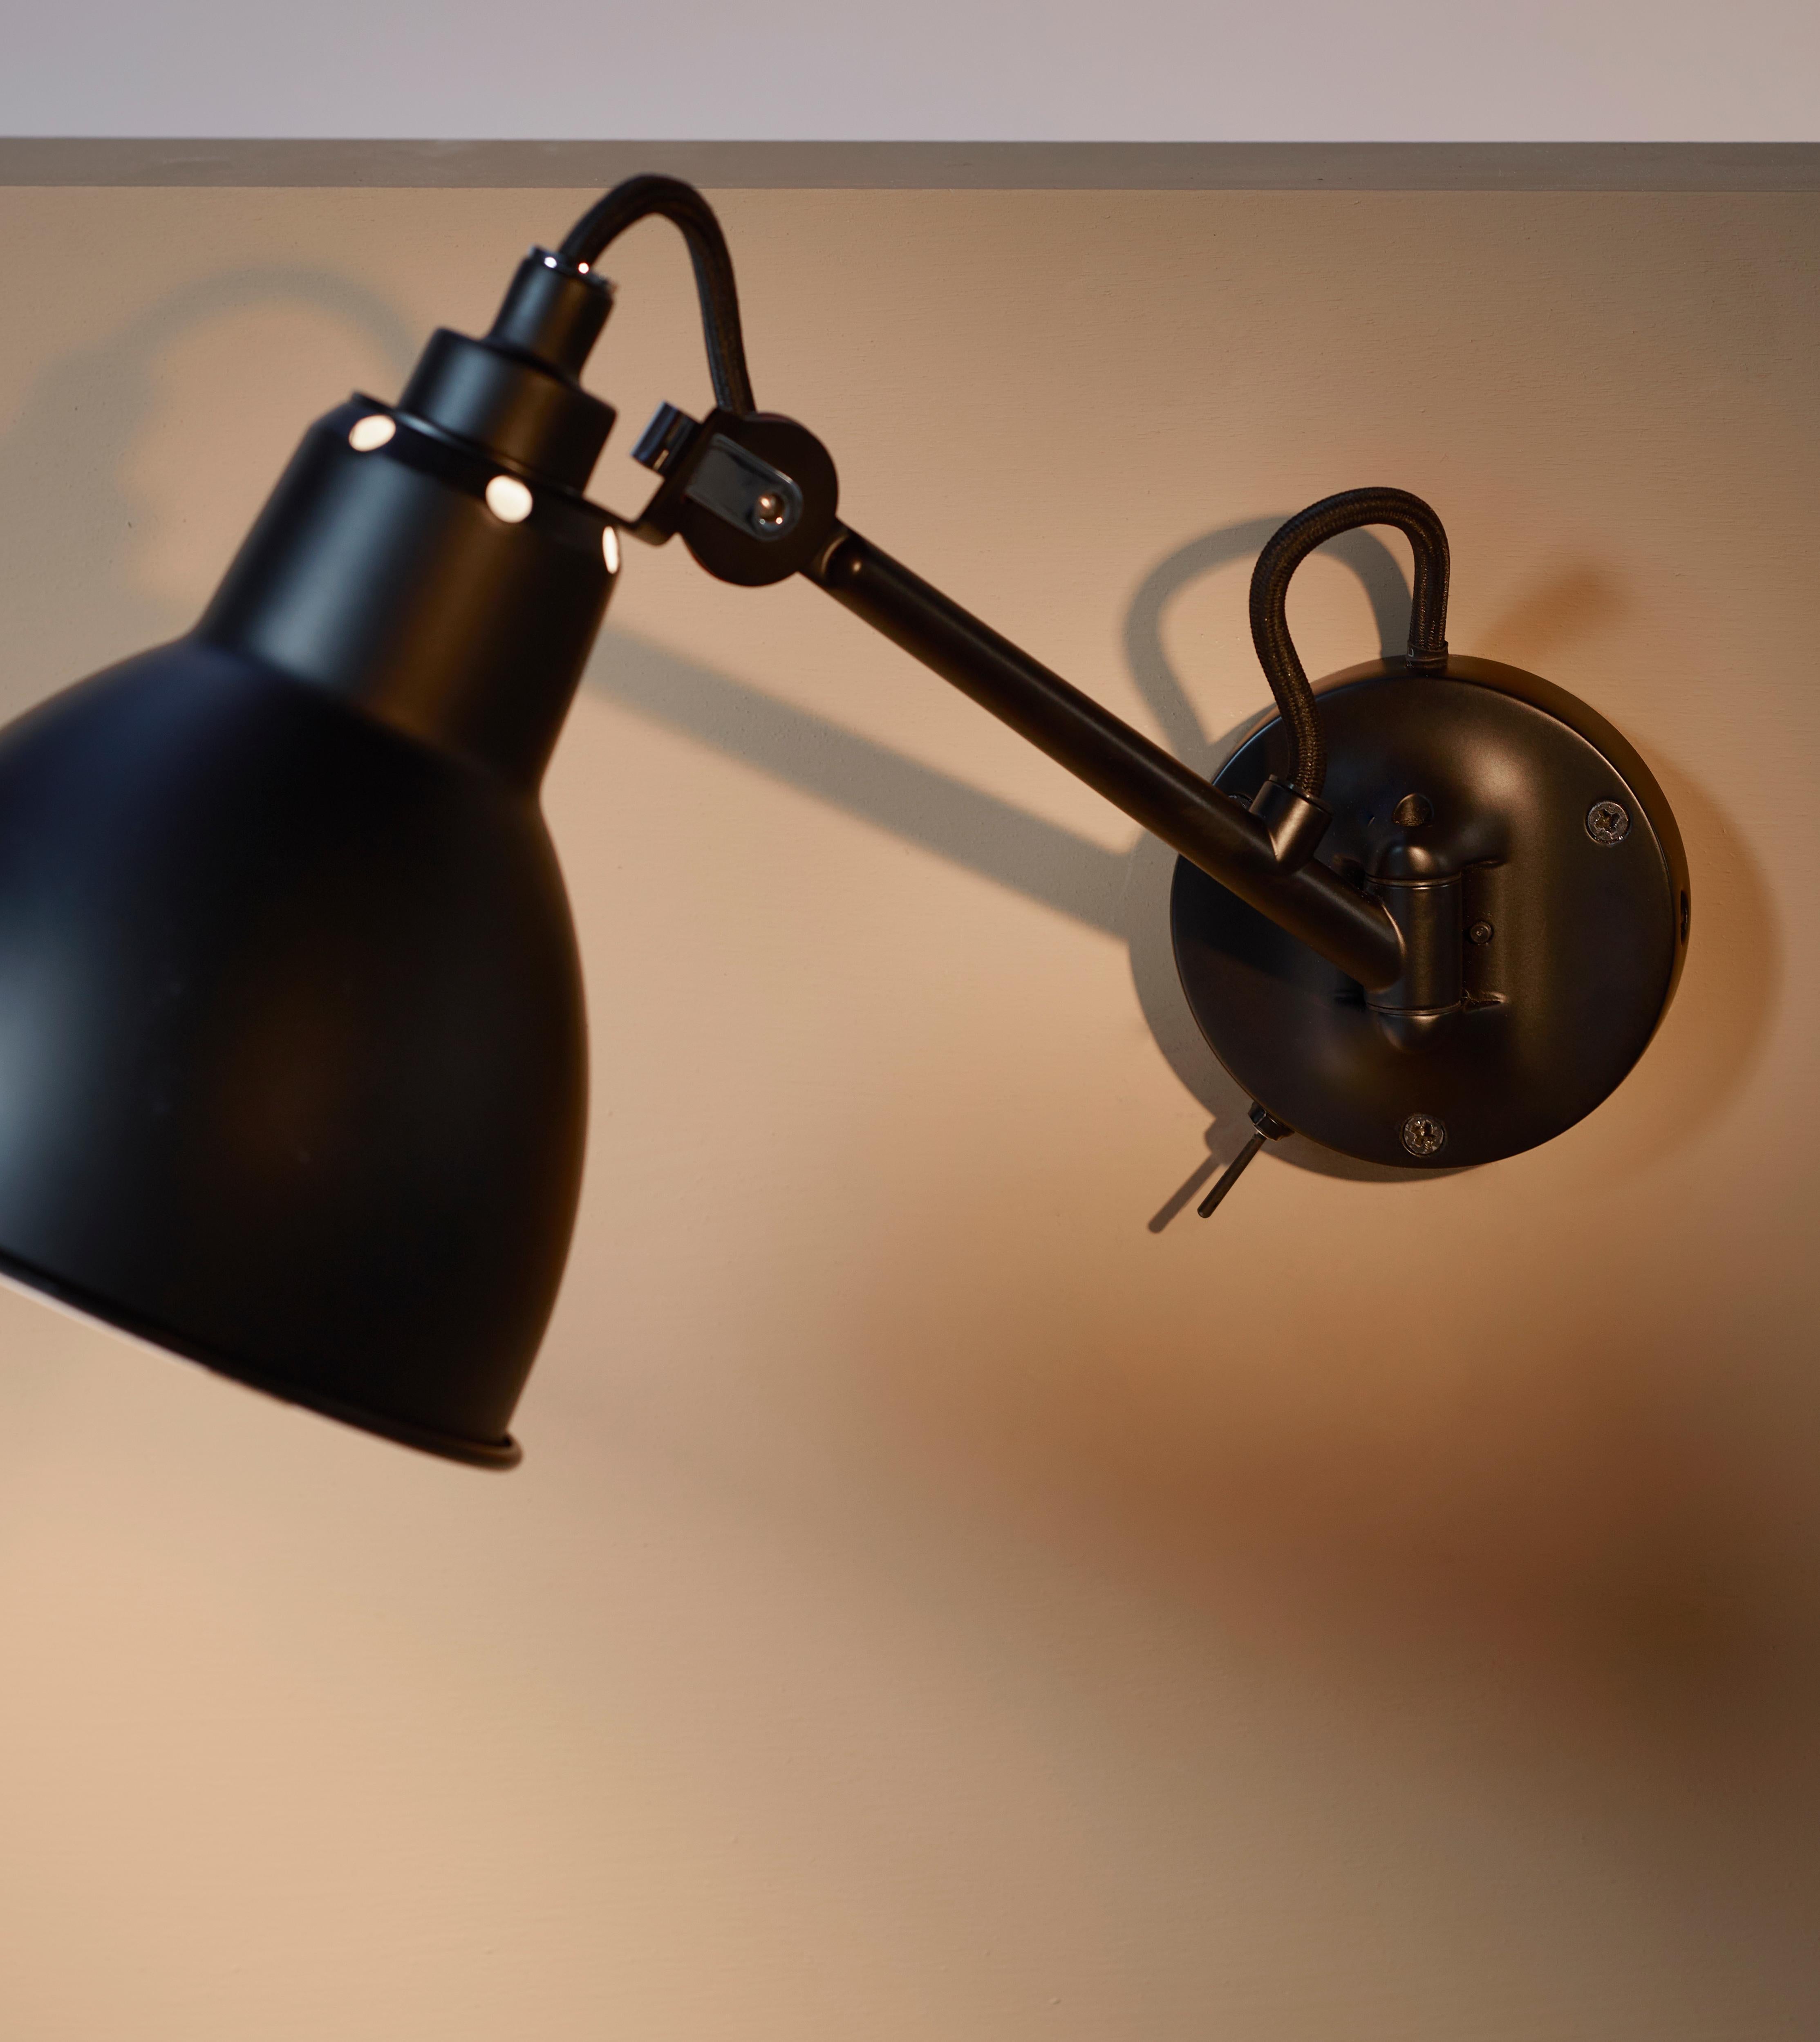 DCW Editions La Lampe Gras N°104 SW Wall Lamp in Black Steel Arm and Red Shade by Bernard-Albin Gras
 
 In 1921 Bernard-Albin GRAS designed a series of lamps for use in offices and in industrial environments. The GRAS lamp, as it was subsequently